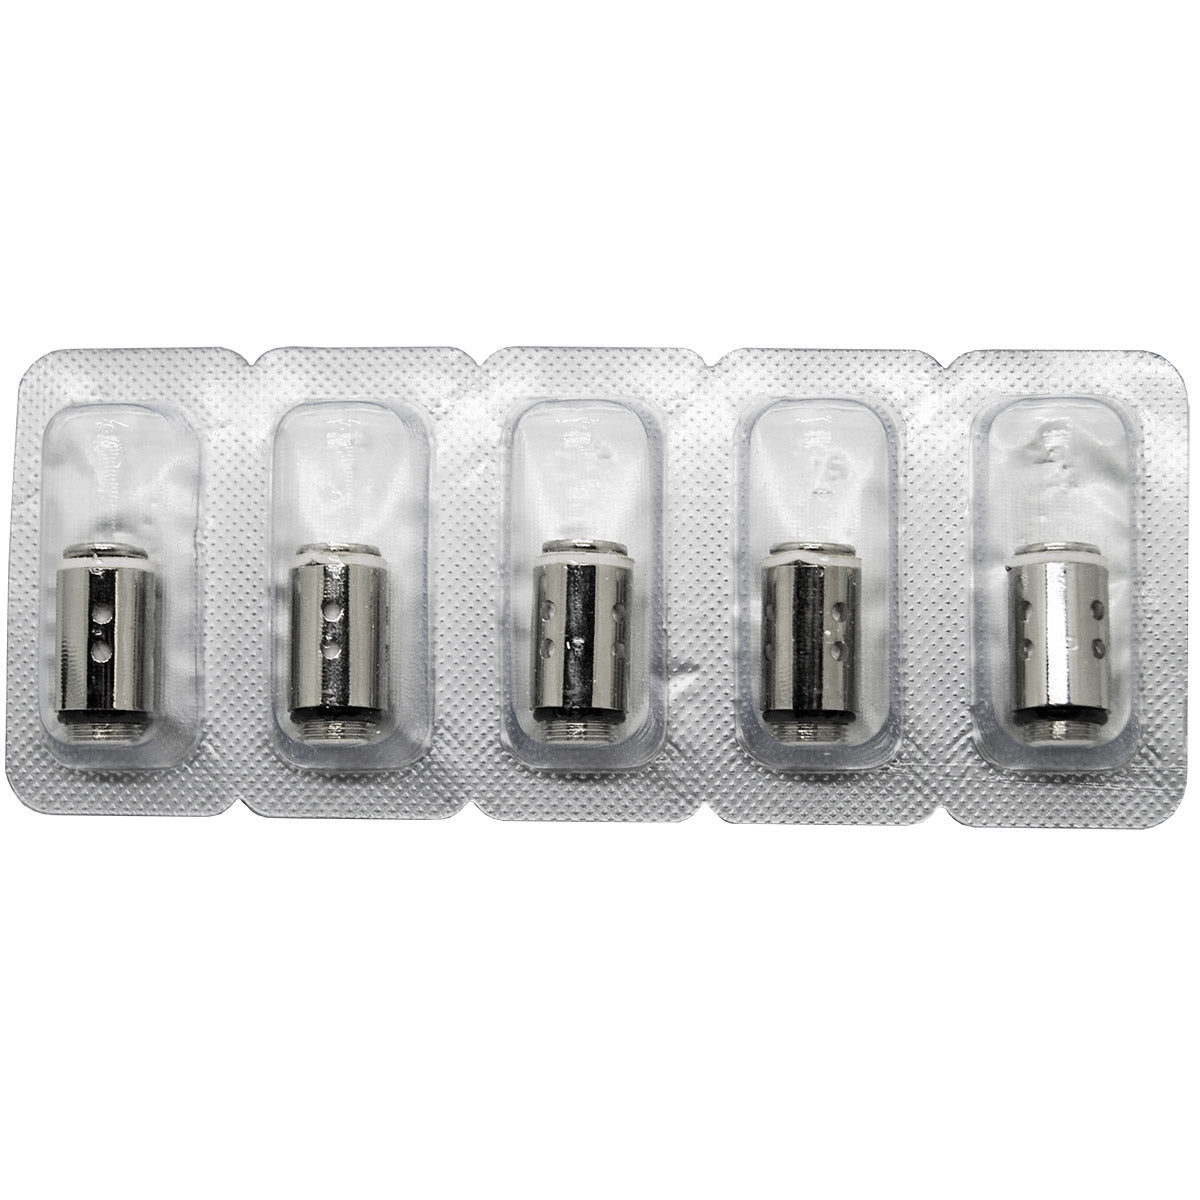 Ripper 2.0 Replacement Coils 5pk